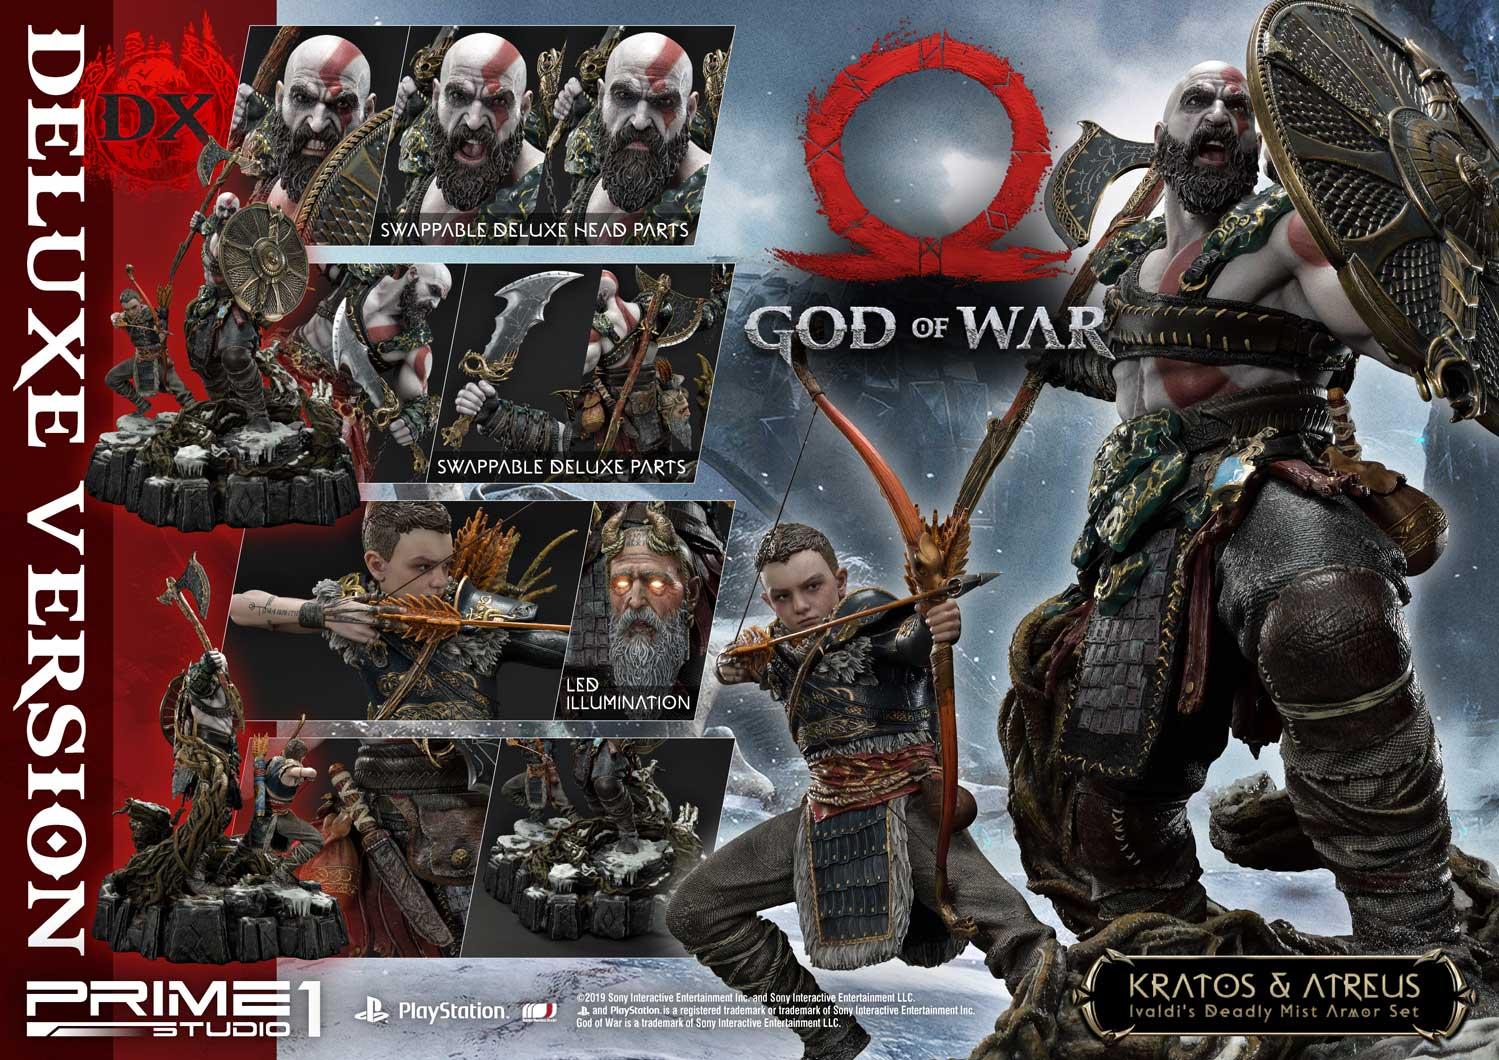 God of War TV series to officially unleash pandemonium at